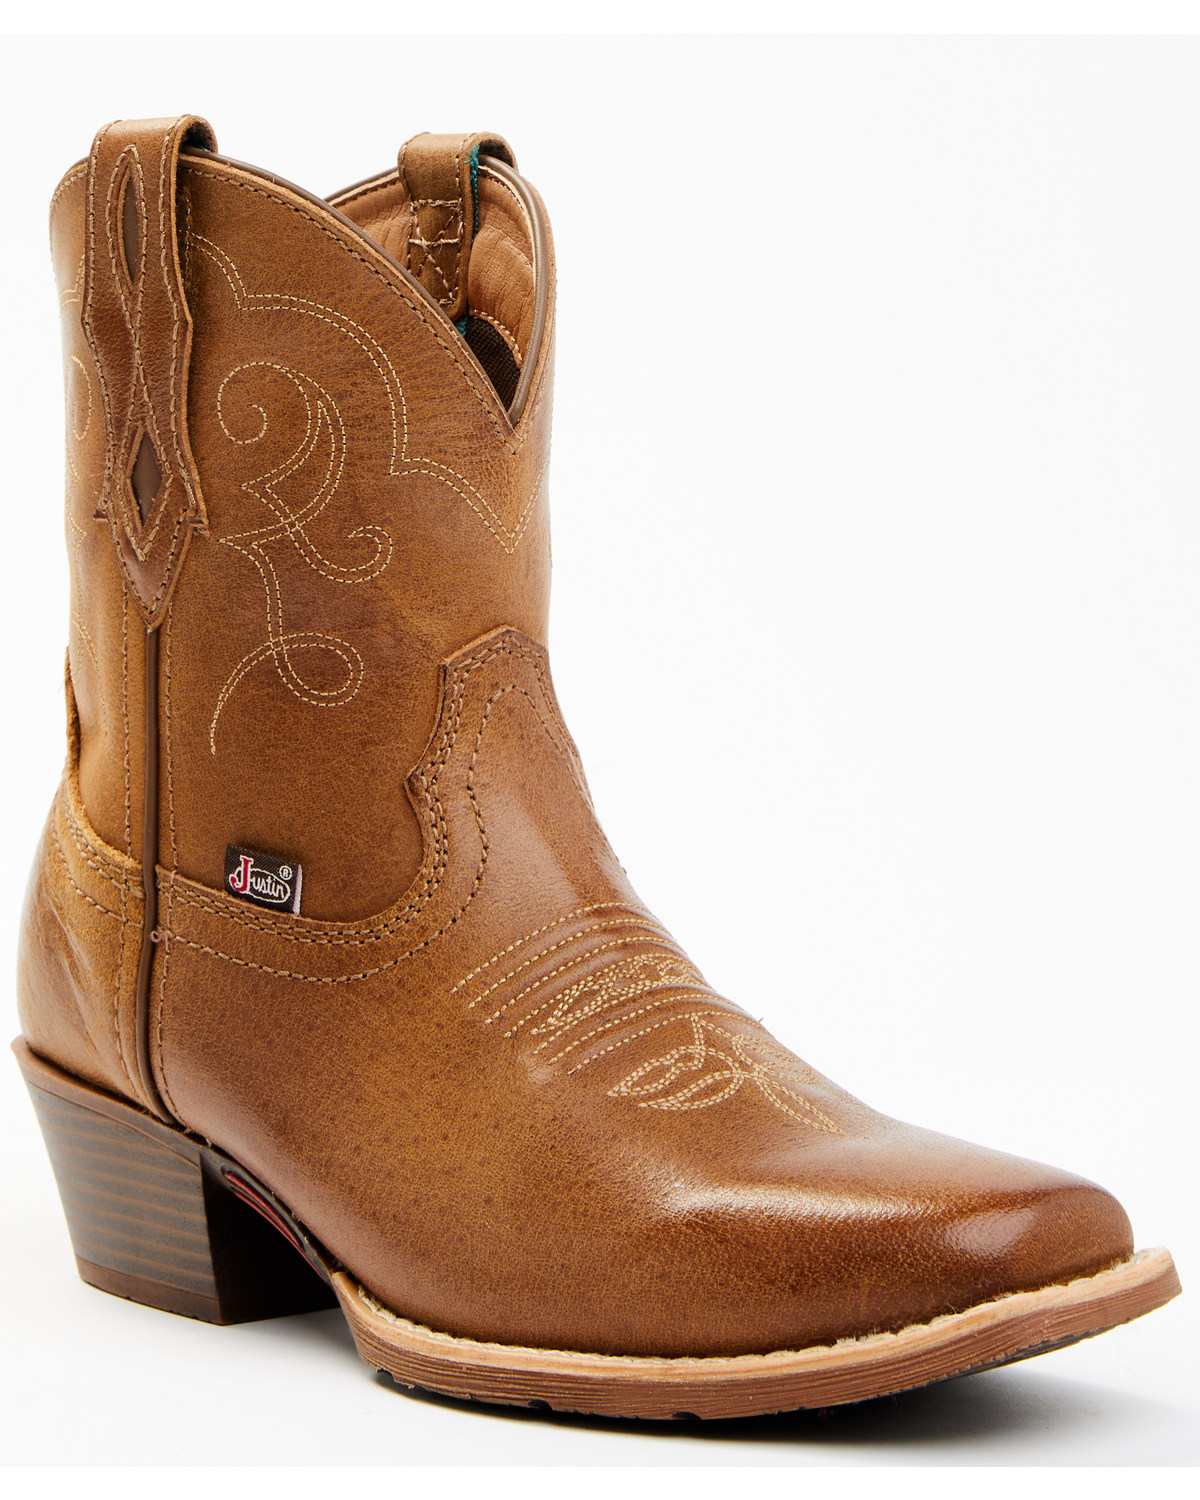 Justin Women's Chellie Western Booties - Square Toe